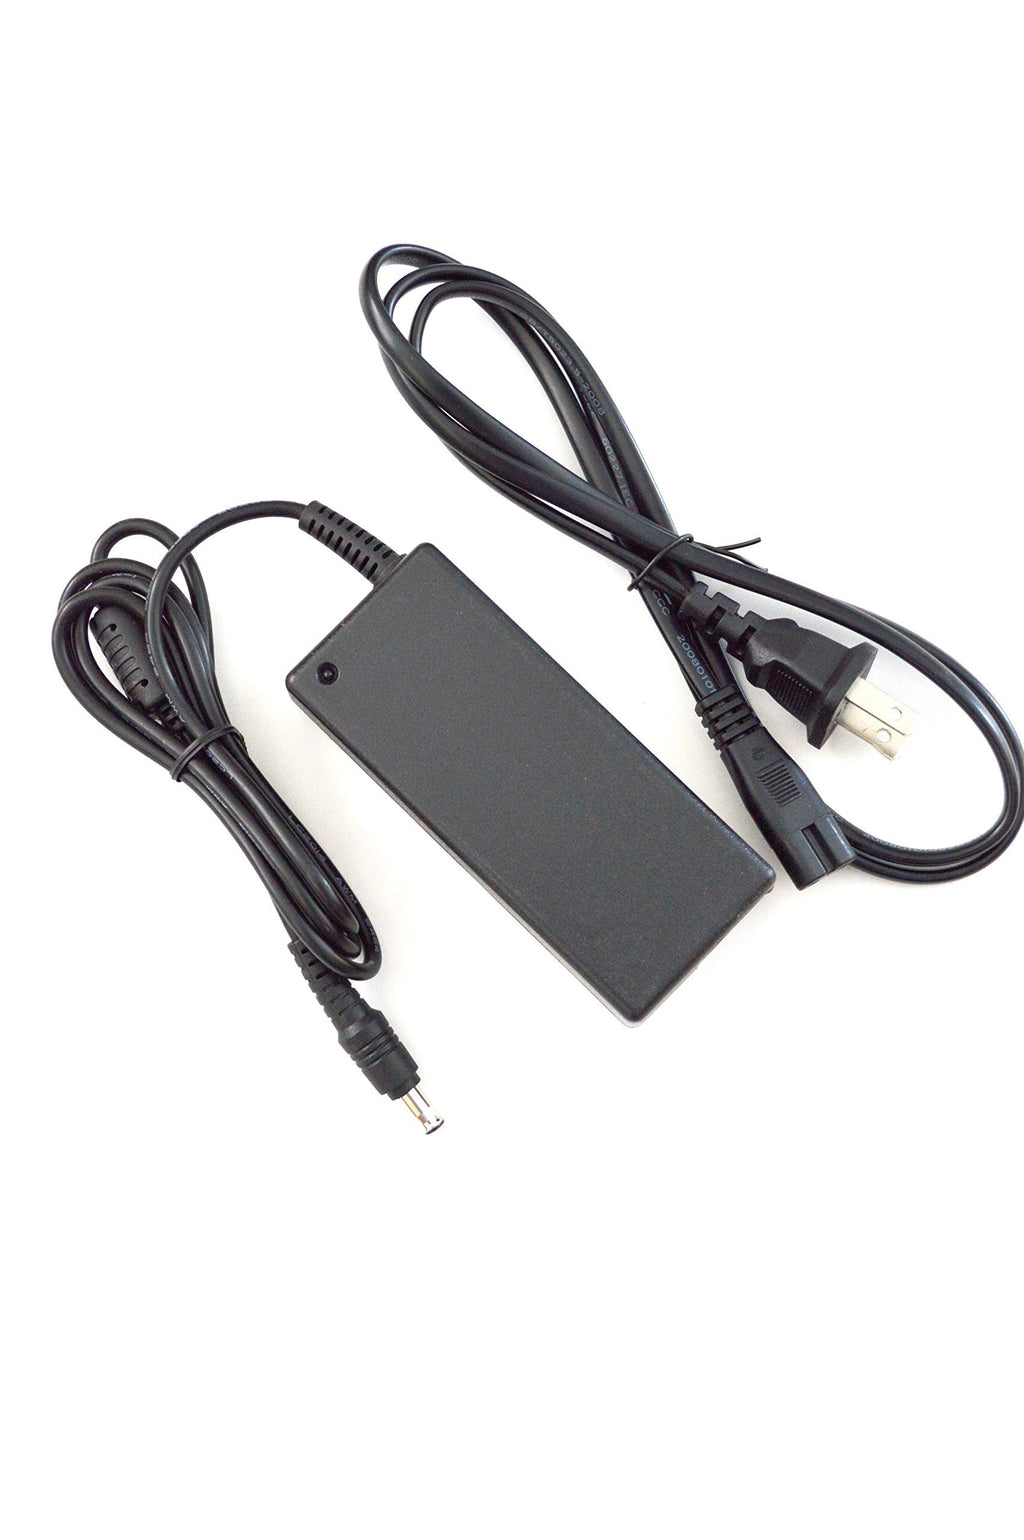 Ac Adapter Charger replacement for Samsung NP300V4A-A04US NP300V5A-A02US NP300V5A-A03US Samsung NP300V5A-A04US NP300V5A-A05US NP300V5A-A06US Laptop Notebook Battery Power Supply Cord Plug (1 Free Usmart Euro Plug Travel Attachment with your Order)